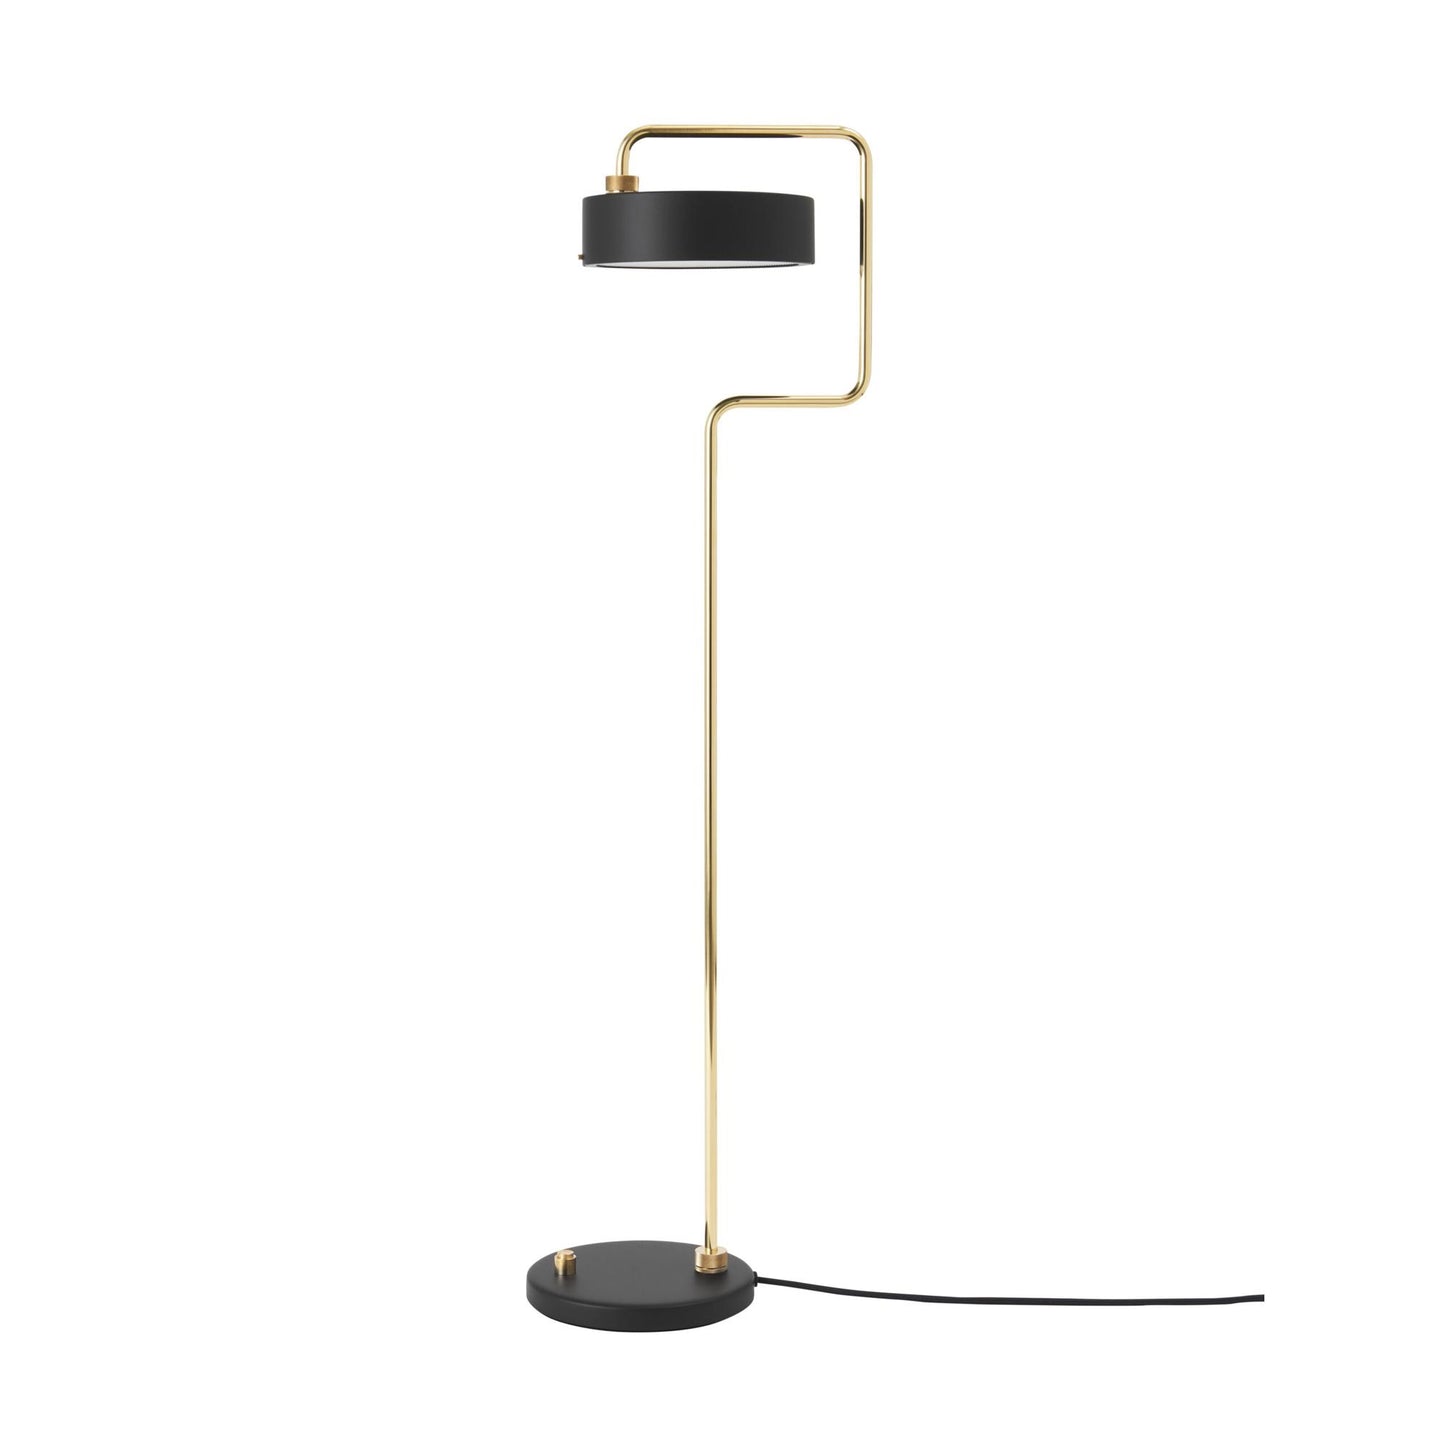 Petite Machine Floor Lamp 01 by Made By Hand #Black